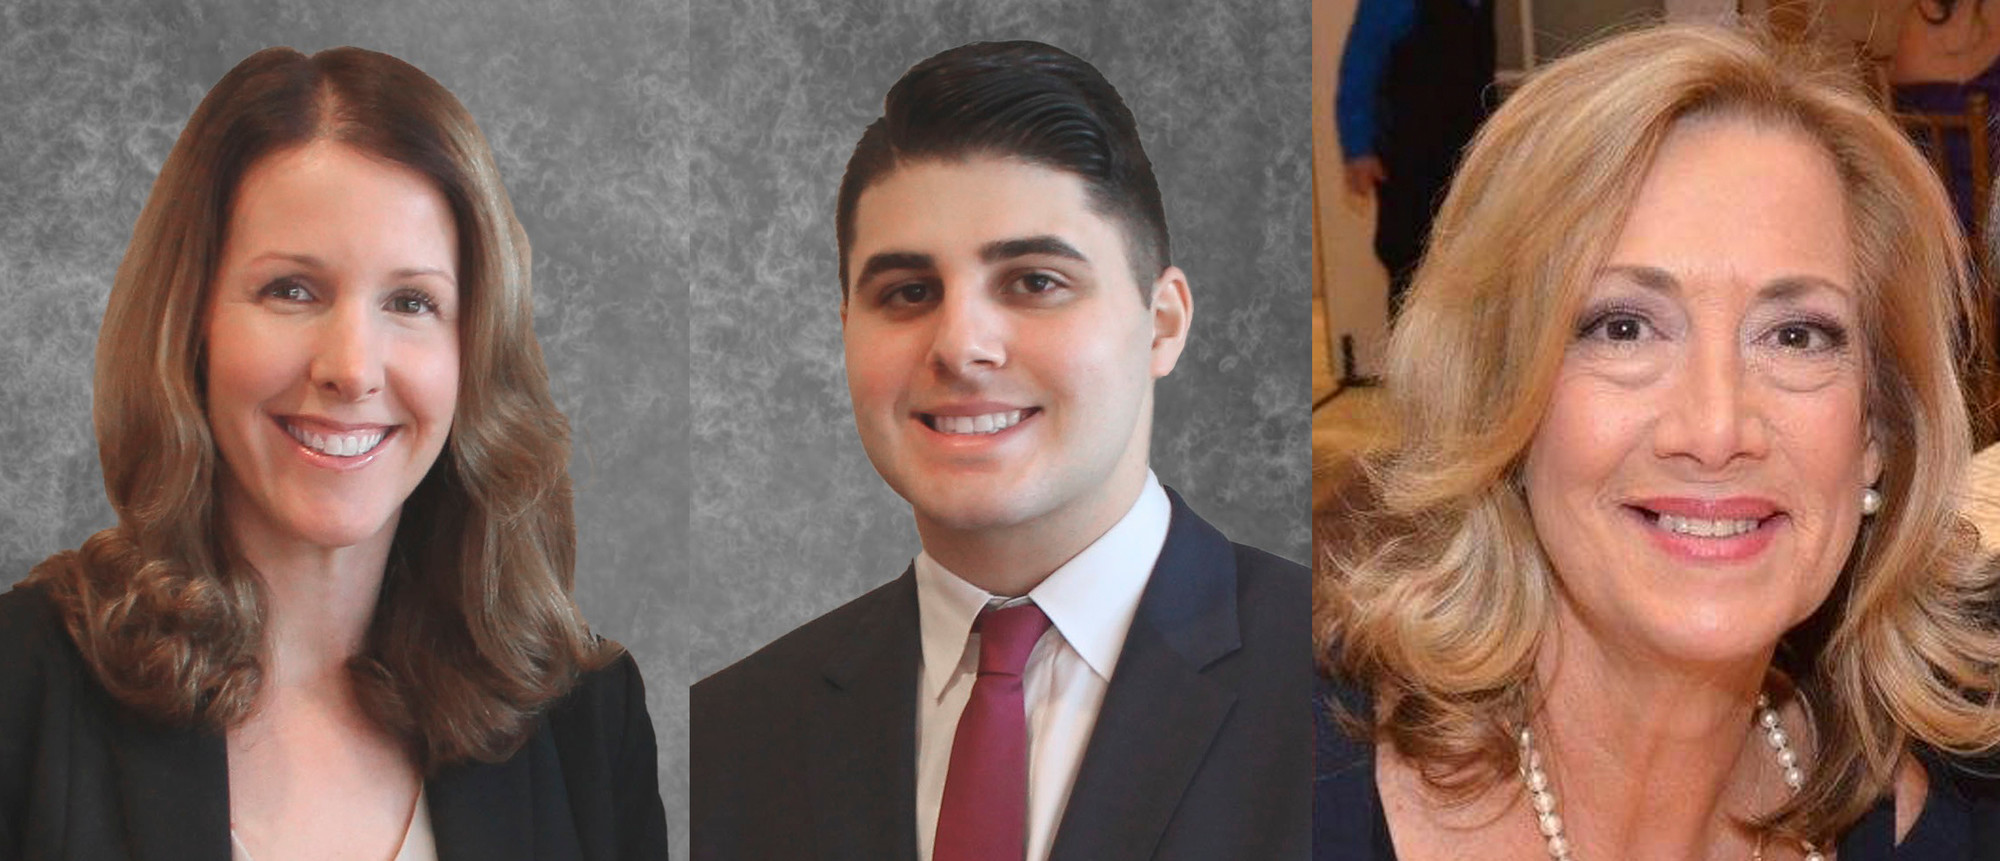 Kera McLoughlin, left, Peter Mountanos and Jean Quinn are running for two seats on the Wantagh Board of Education.